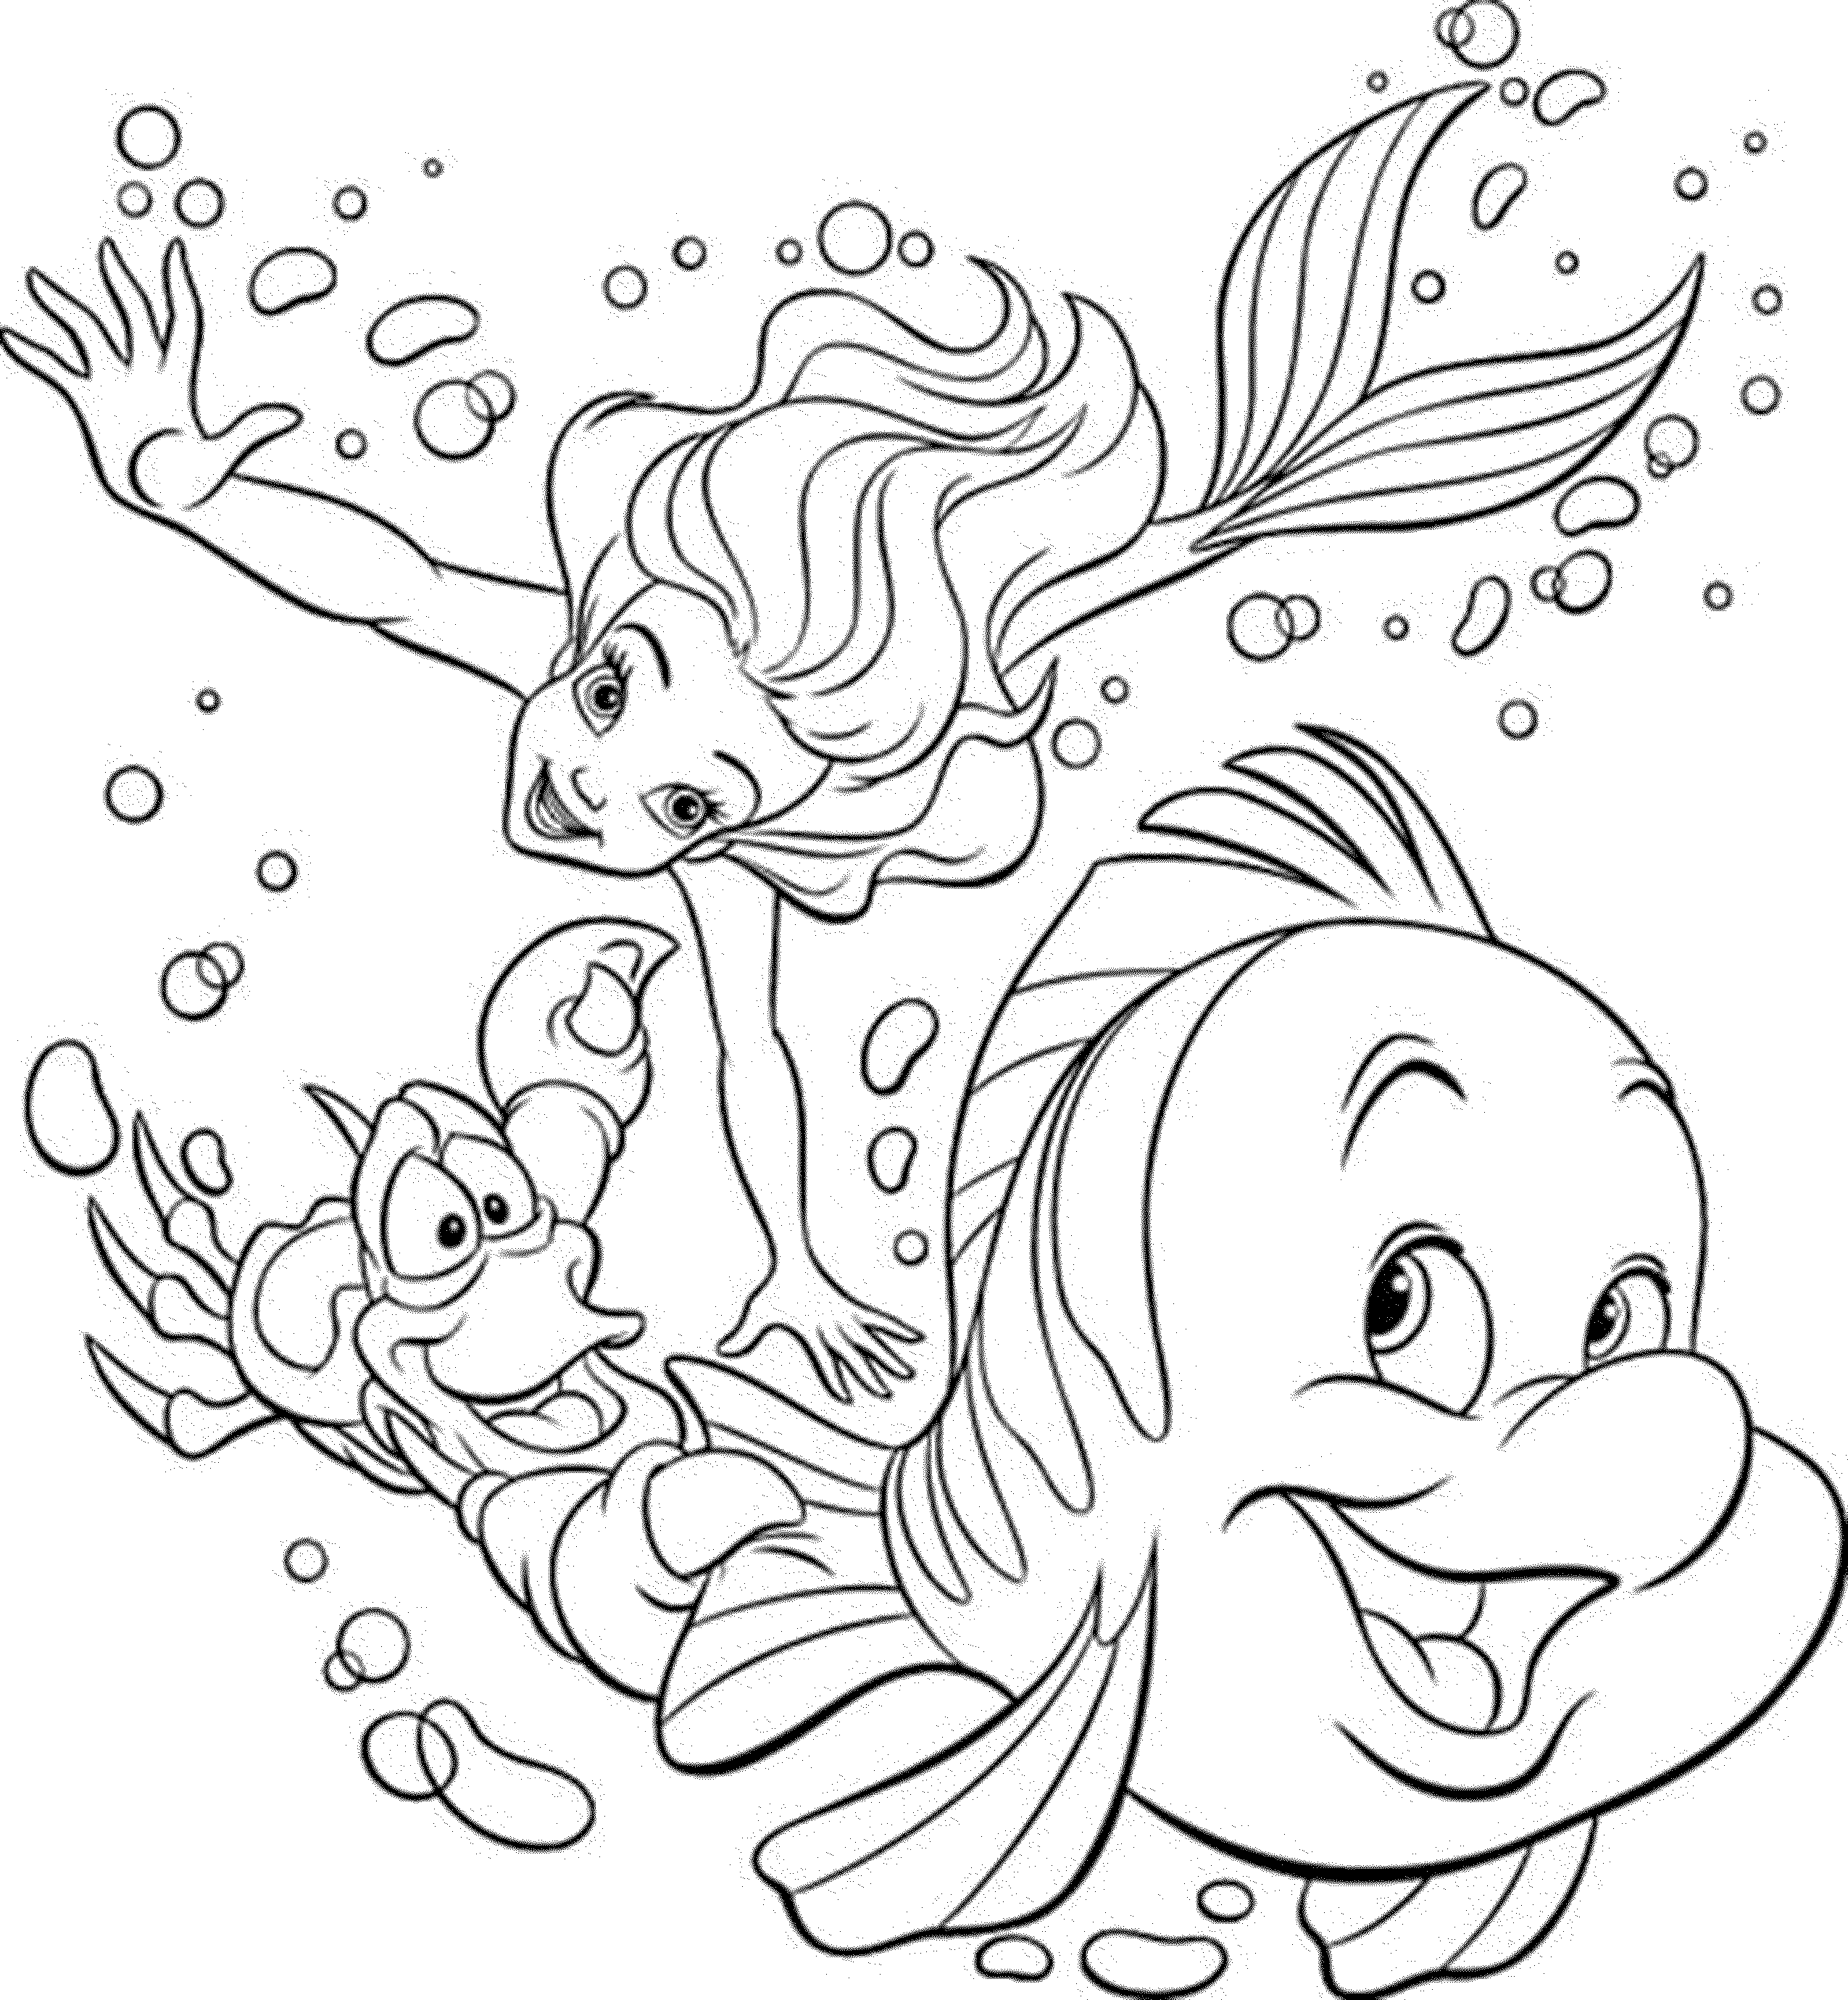 the-special-characteristic-of-the-coloring-pages-for-adults